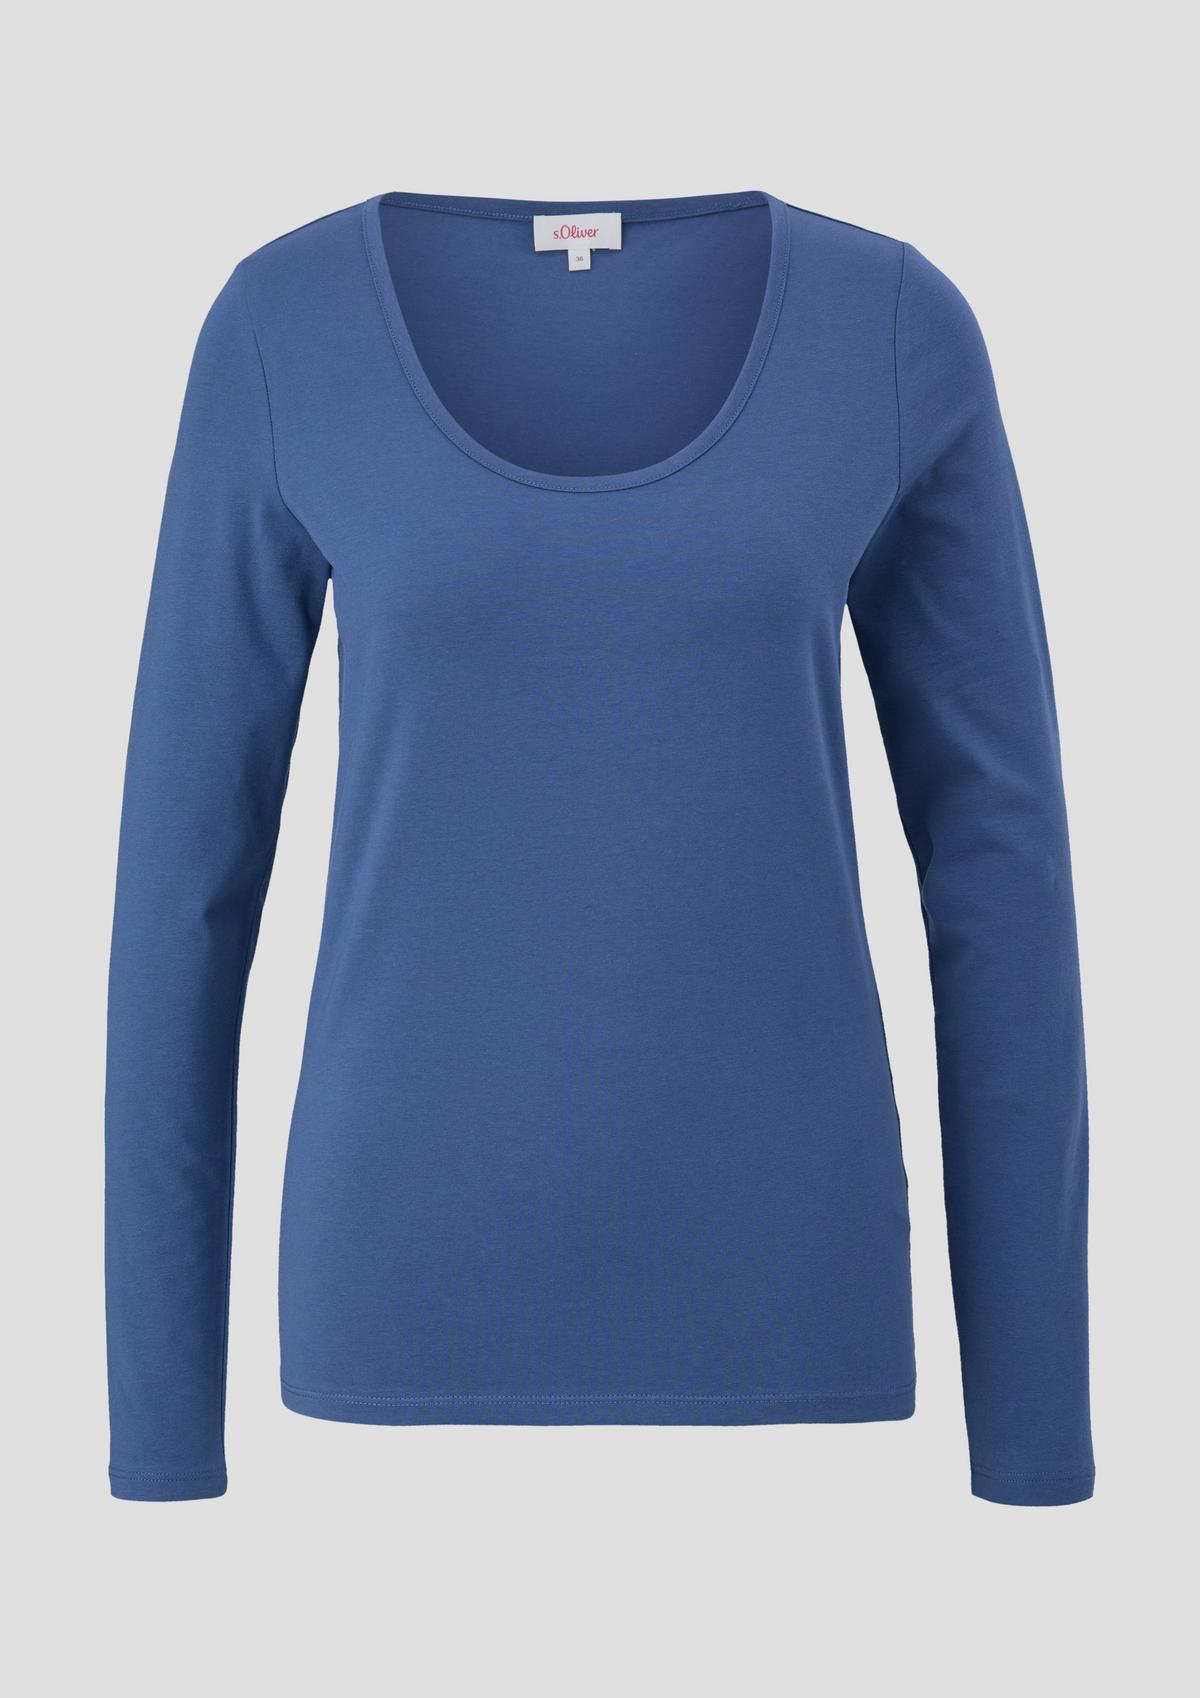 s.Oliver Long sleeve top made of stretch cotton